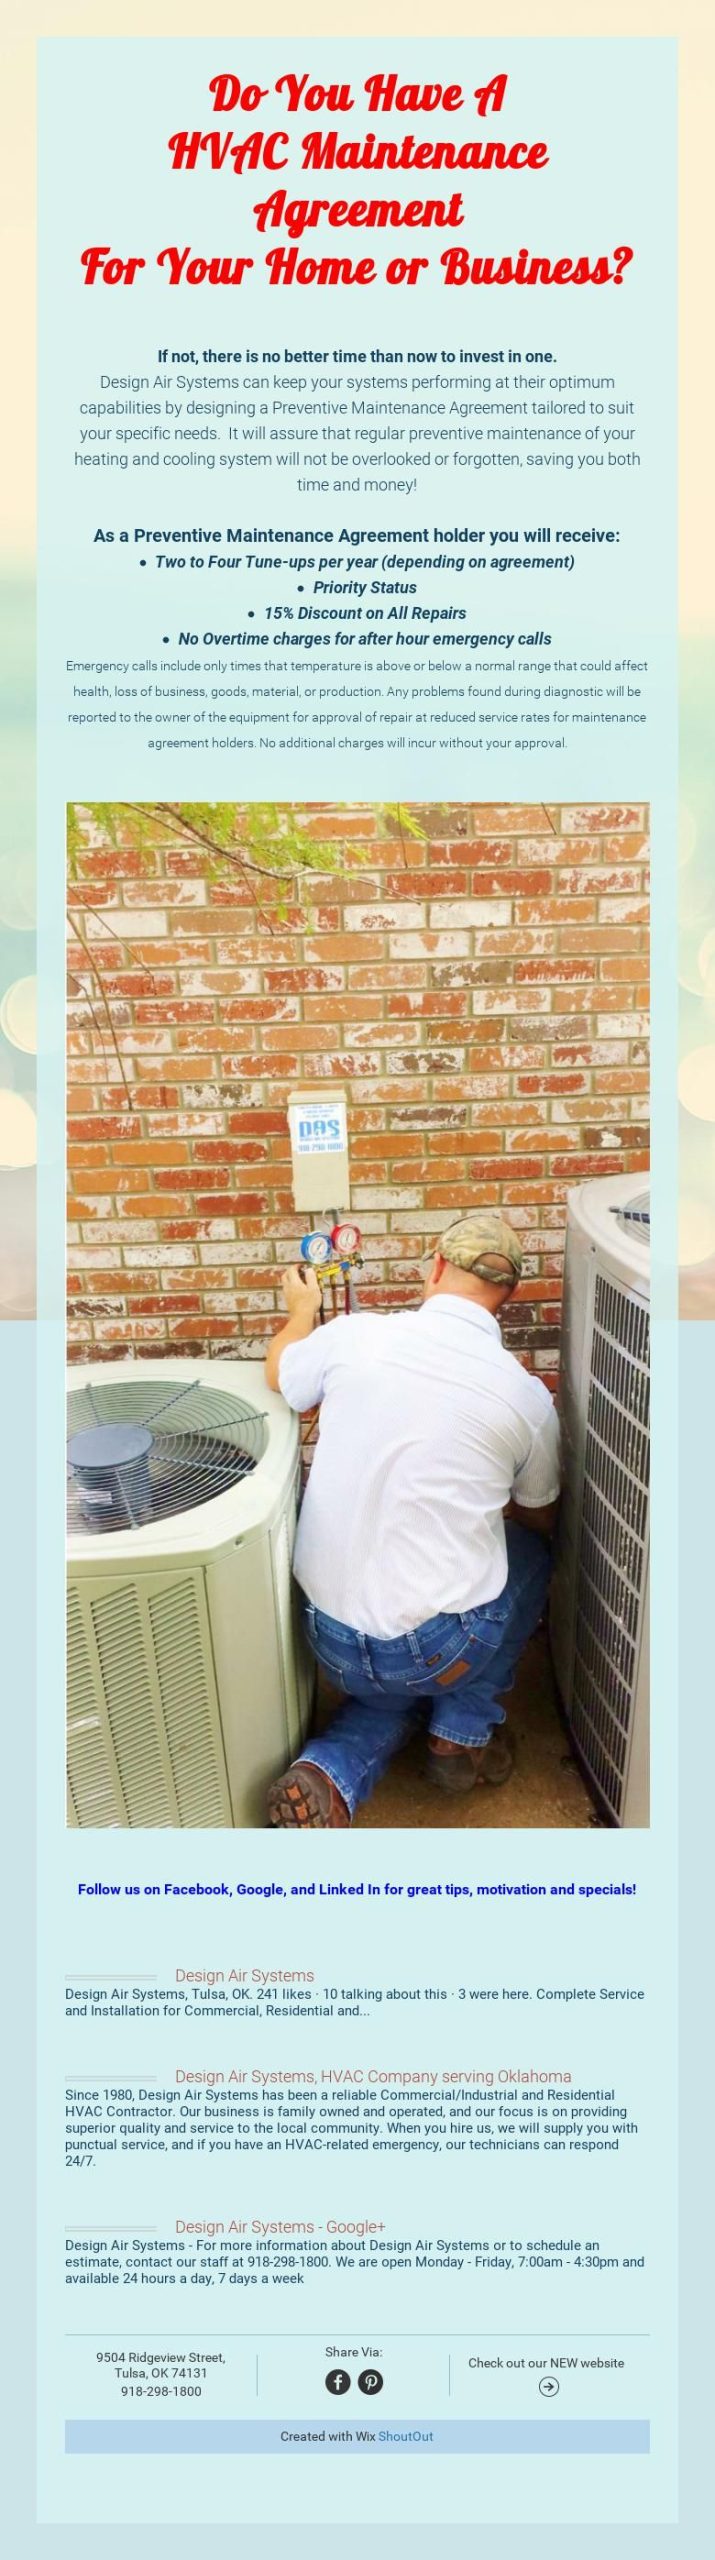 DIY HVAC Care Simple Maintenance Tips that Can Save You Money